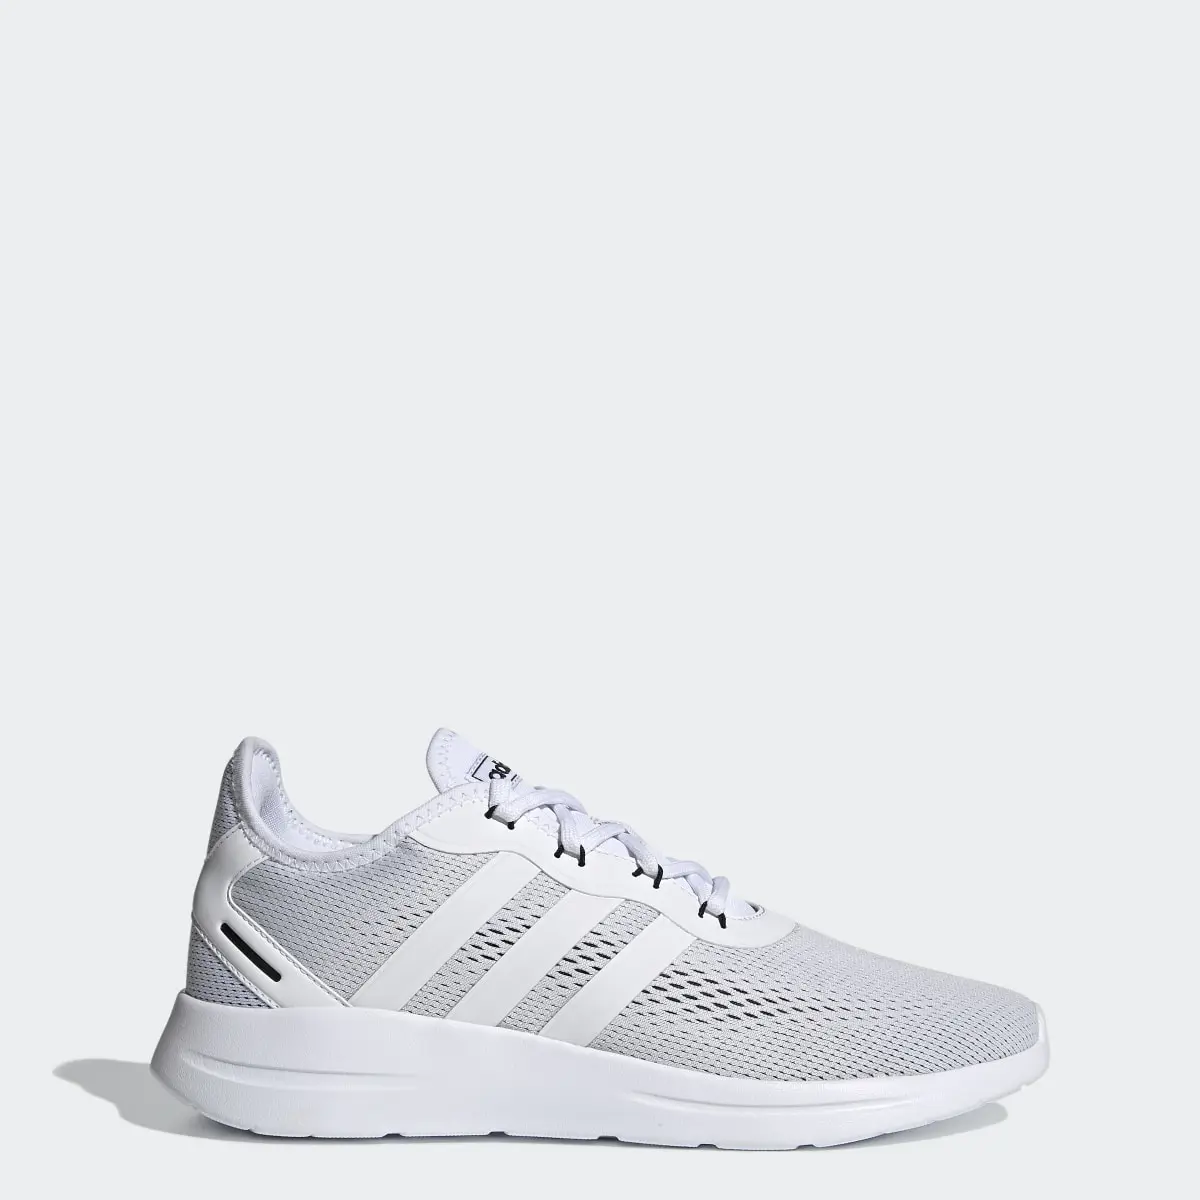 Adidas Lite Racer RBN 2.0 Shoes. 1